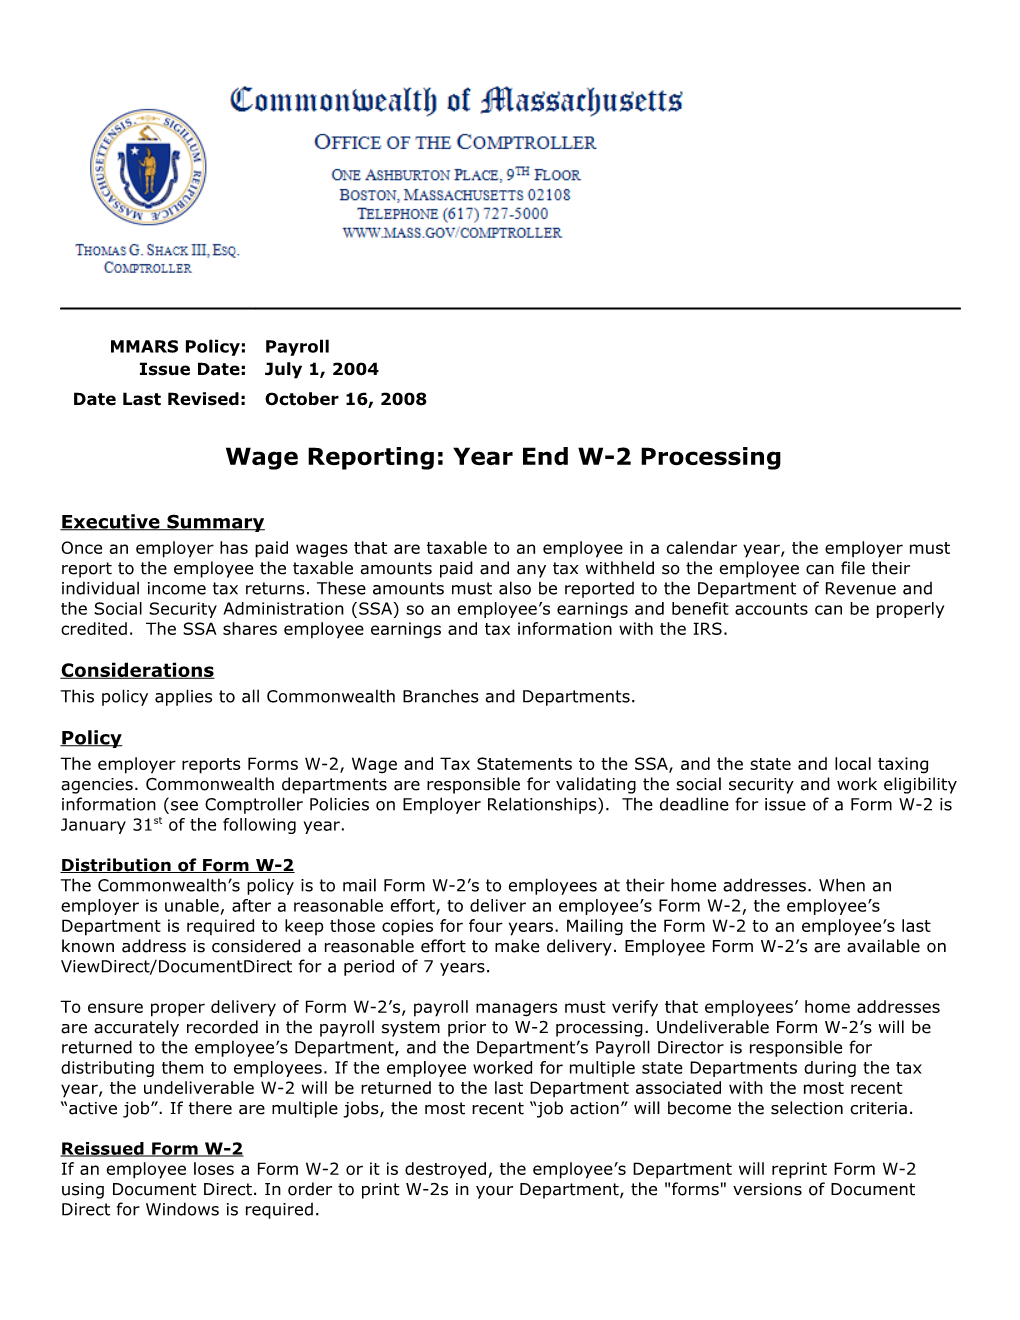 Wage Reporting: Year End W-2 Processing